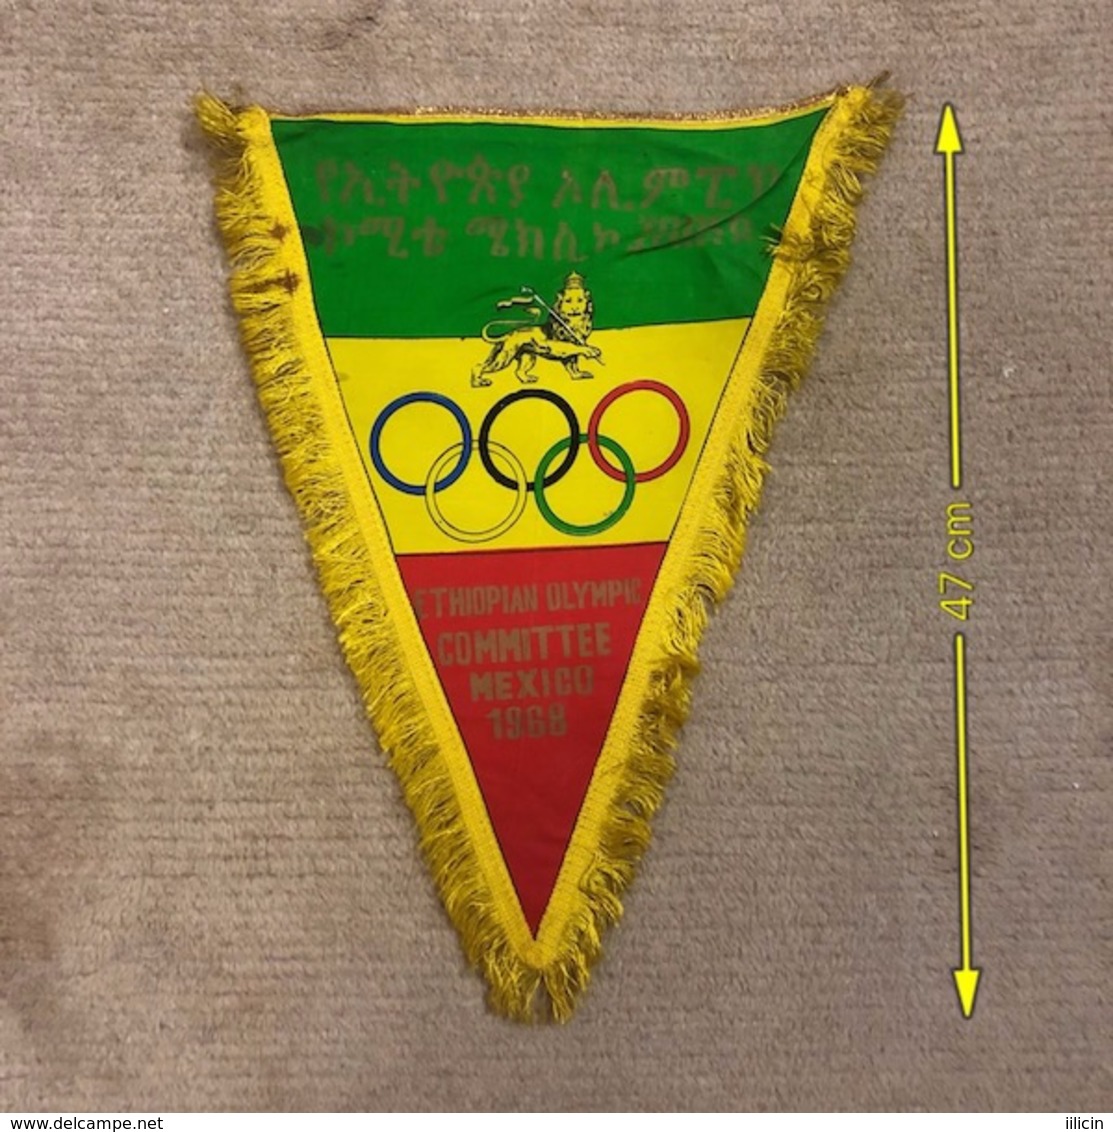 Flag Pennant Banderín ZA000496 - Olympics Mexico City 1968 Ethiopia National Committee NOC - Habillement, Souvenirs & Autres